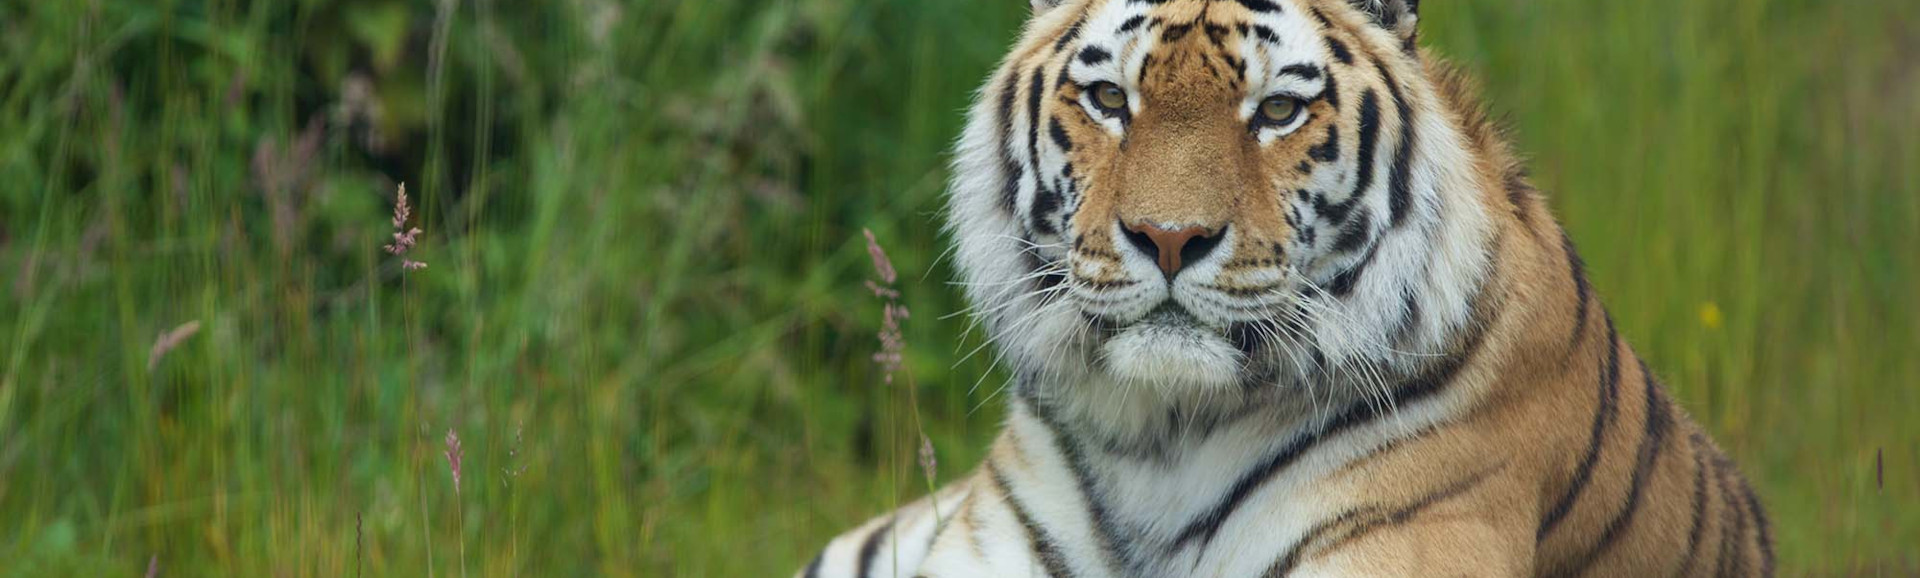 an Amur tiger lying down on grass looking directly at the camera